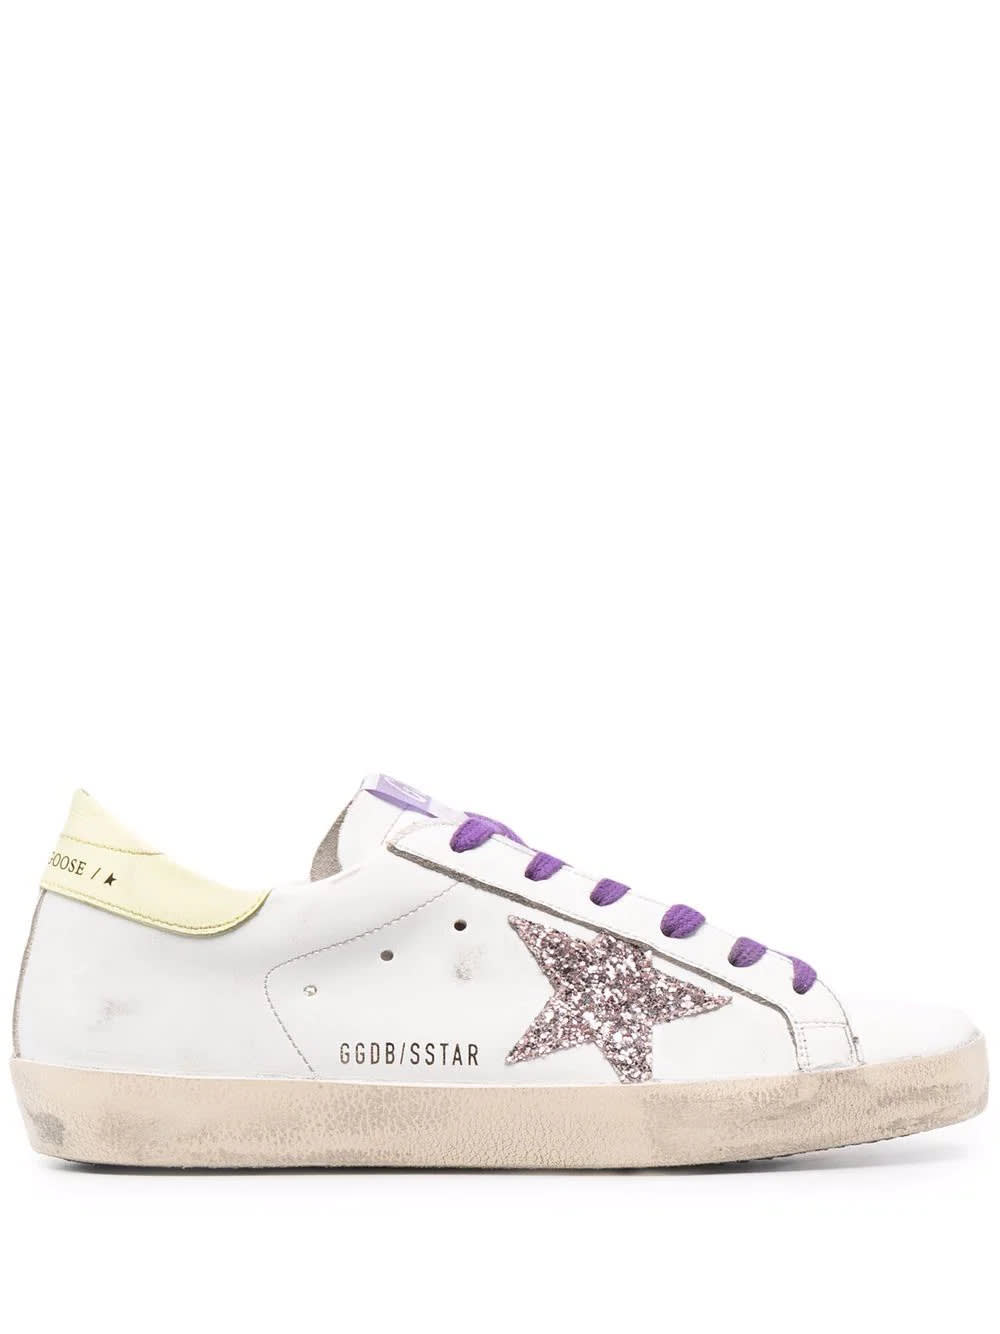 Golden Goose Woman White Super-star Sneakers With Glitter Star, Purple Laces And Light Yellow Spoiler